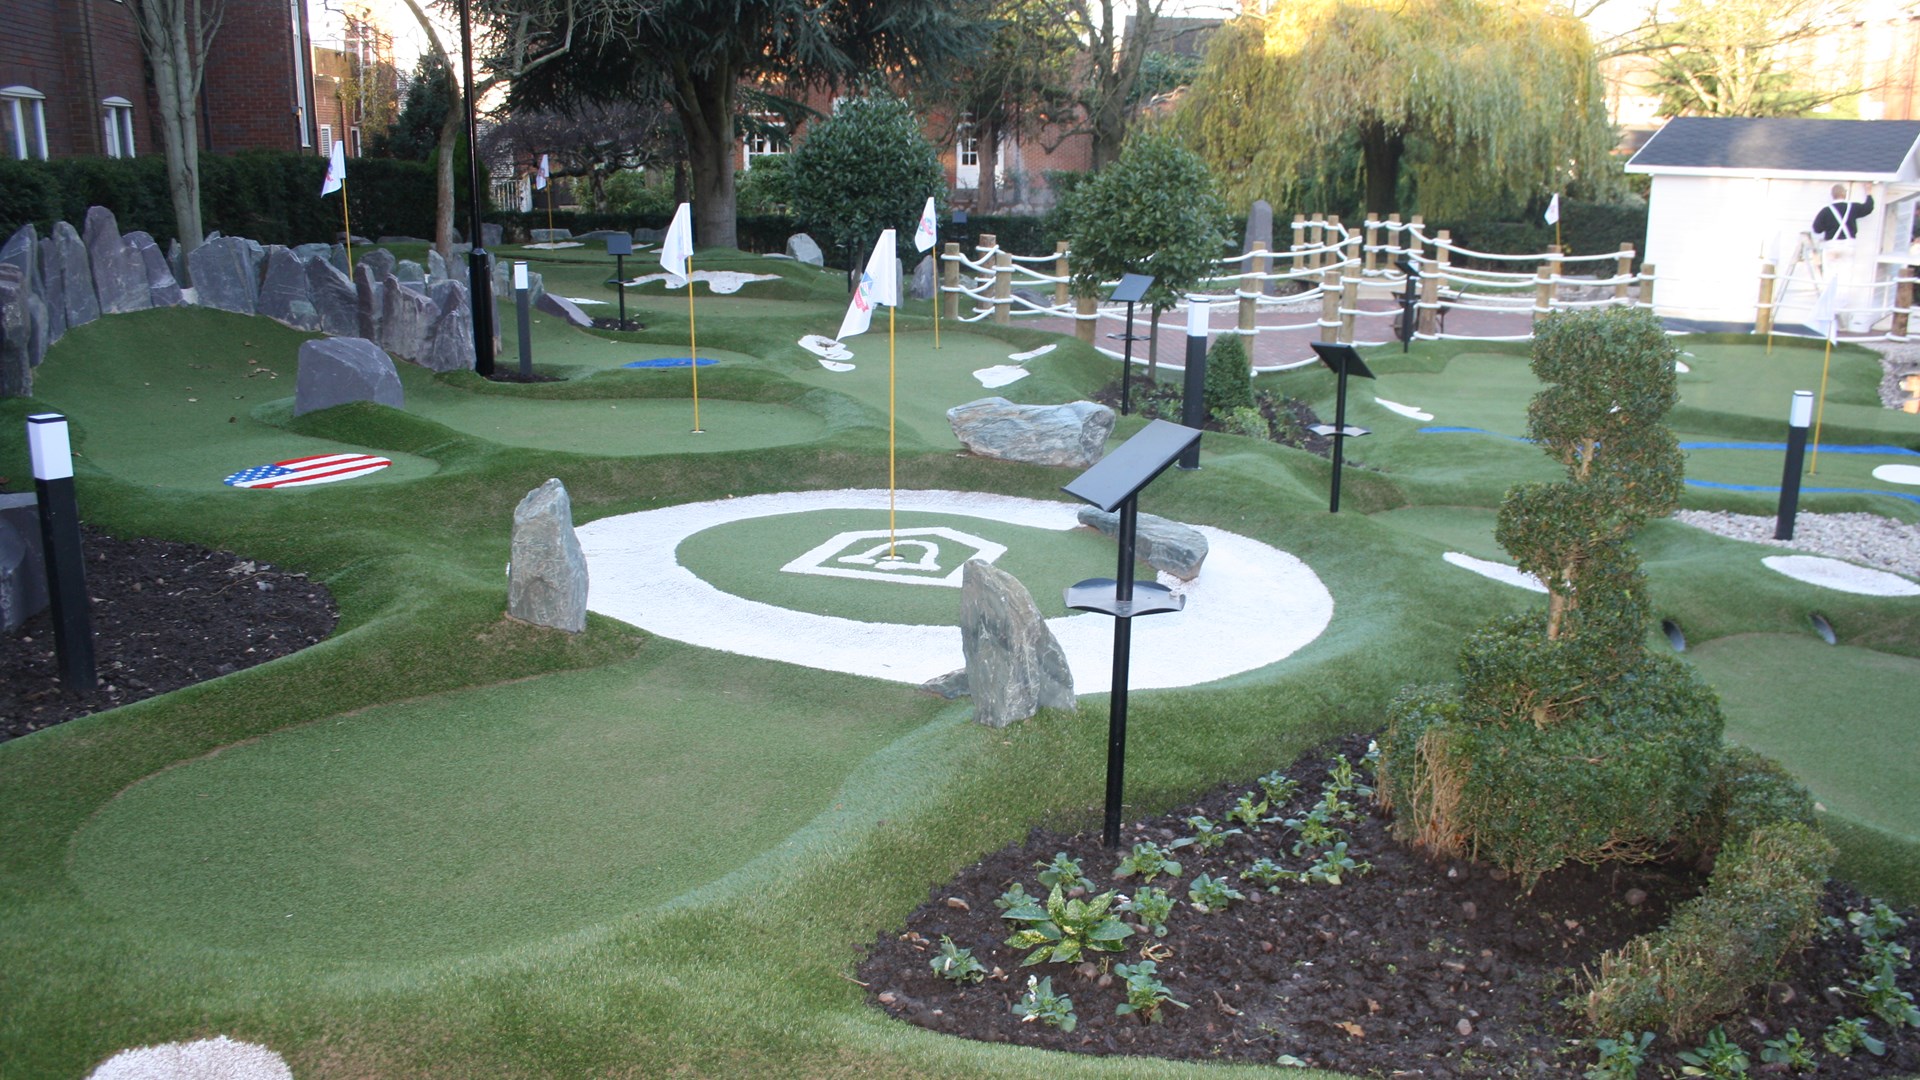 Mini golf at the Belfry